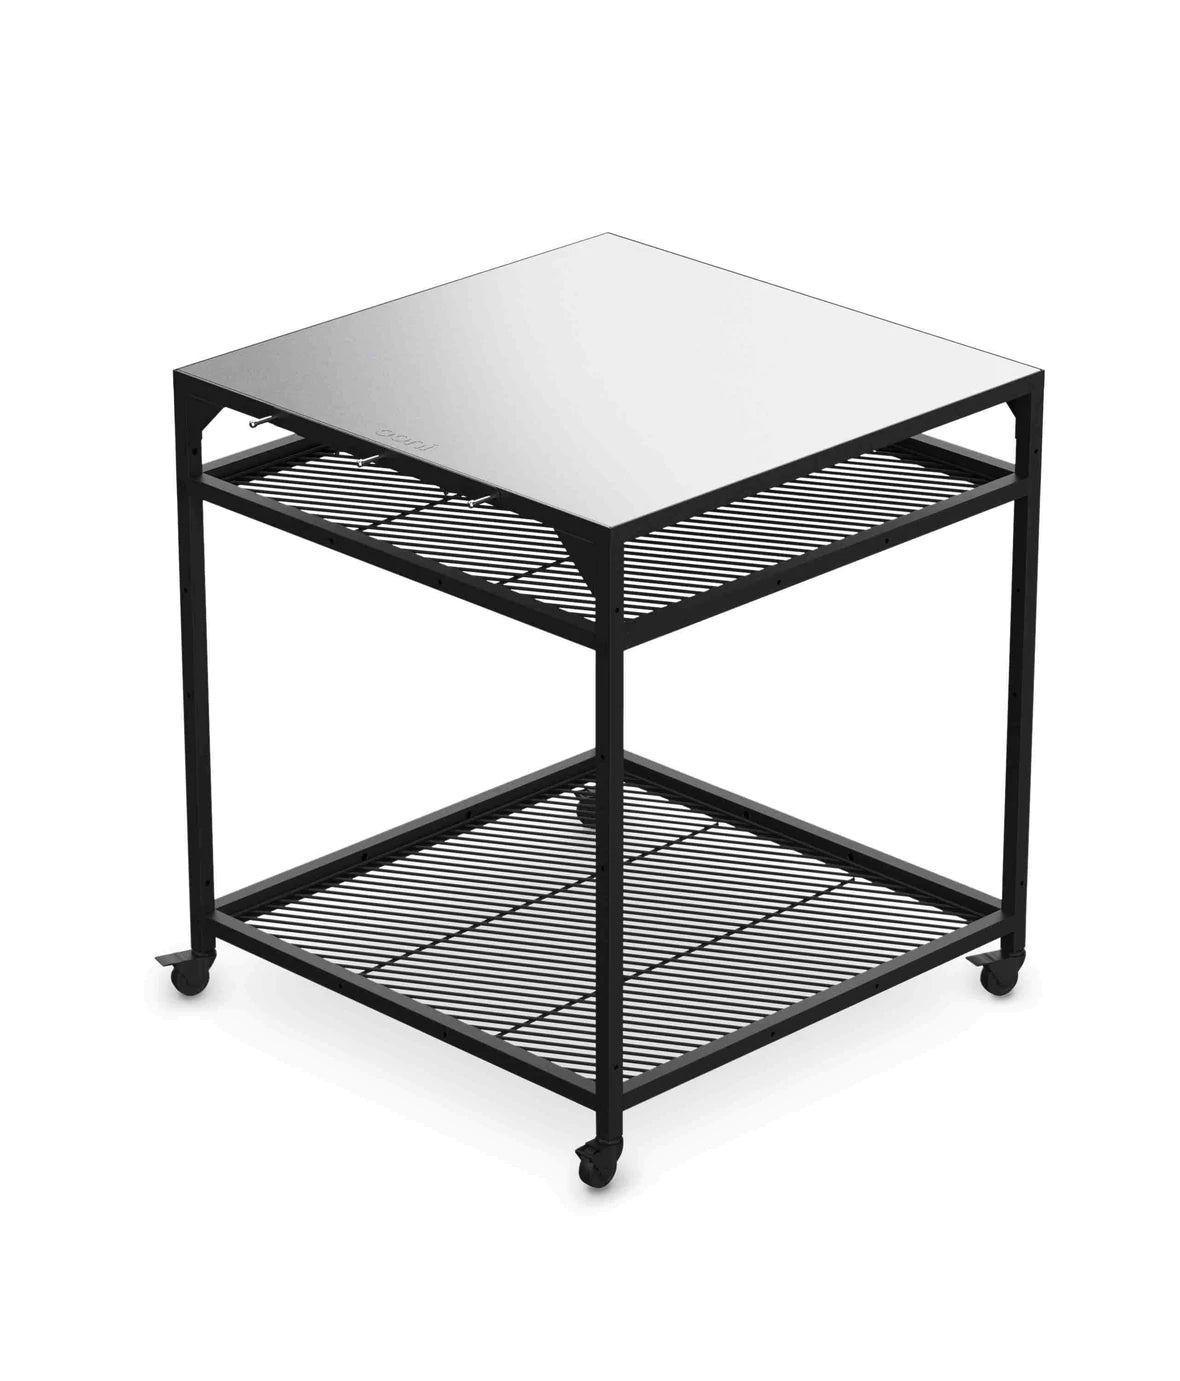 Table inox modulaire Ooni - Grande taille    - Ooni - Four à pizza - 